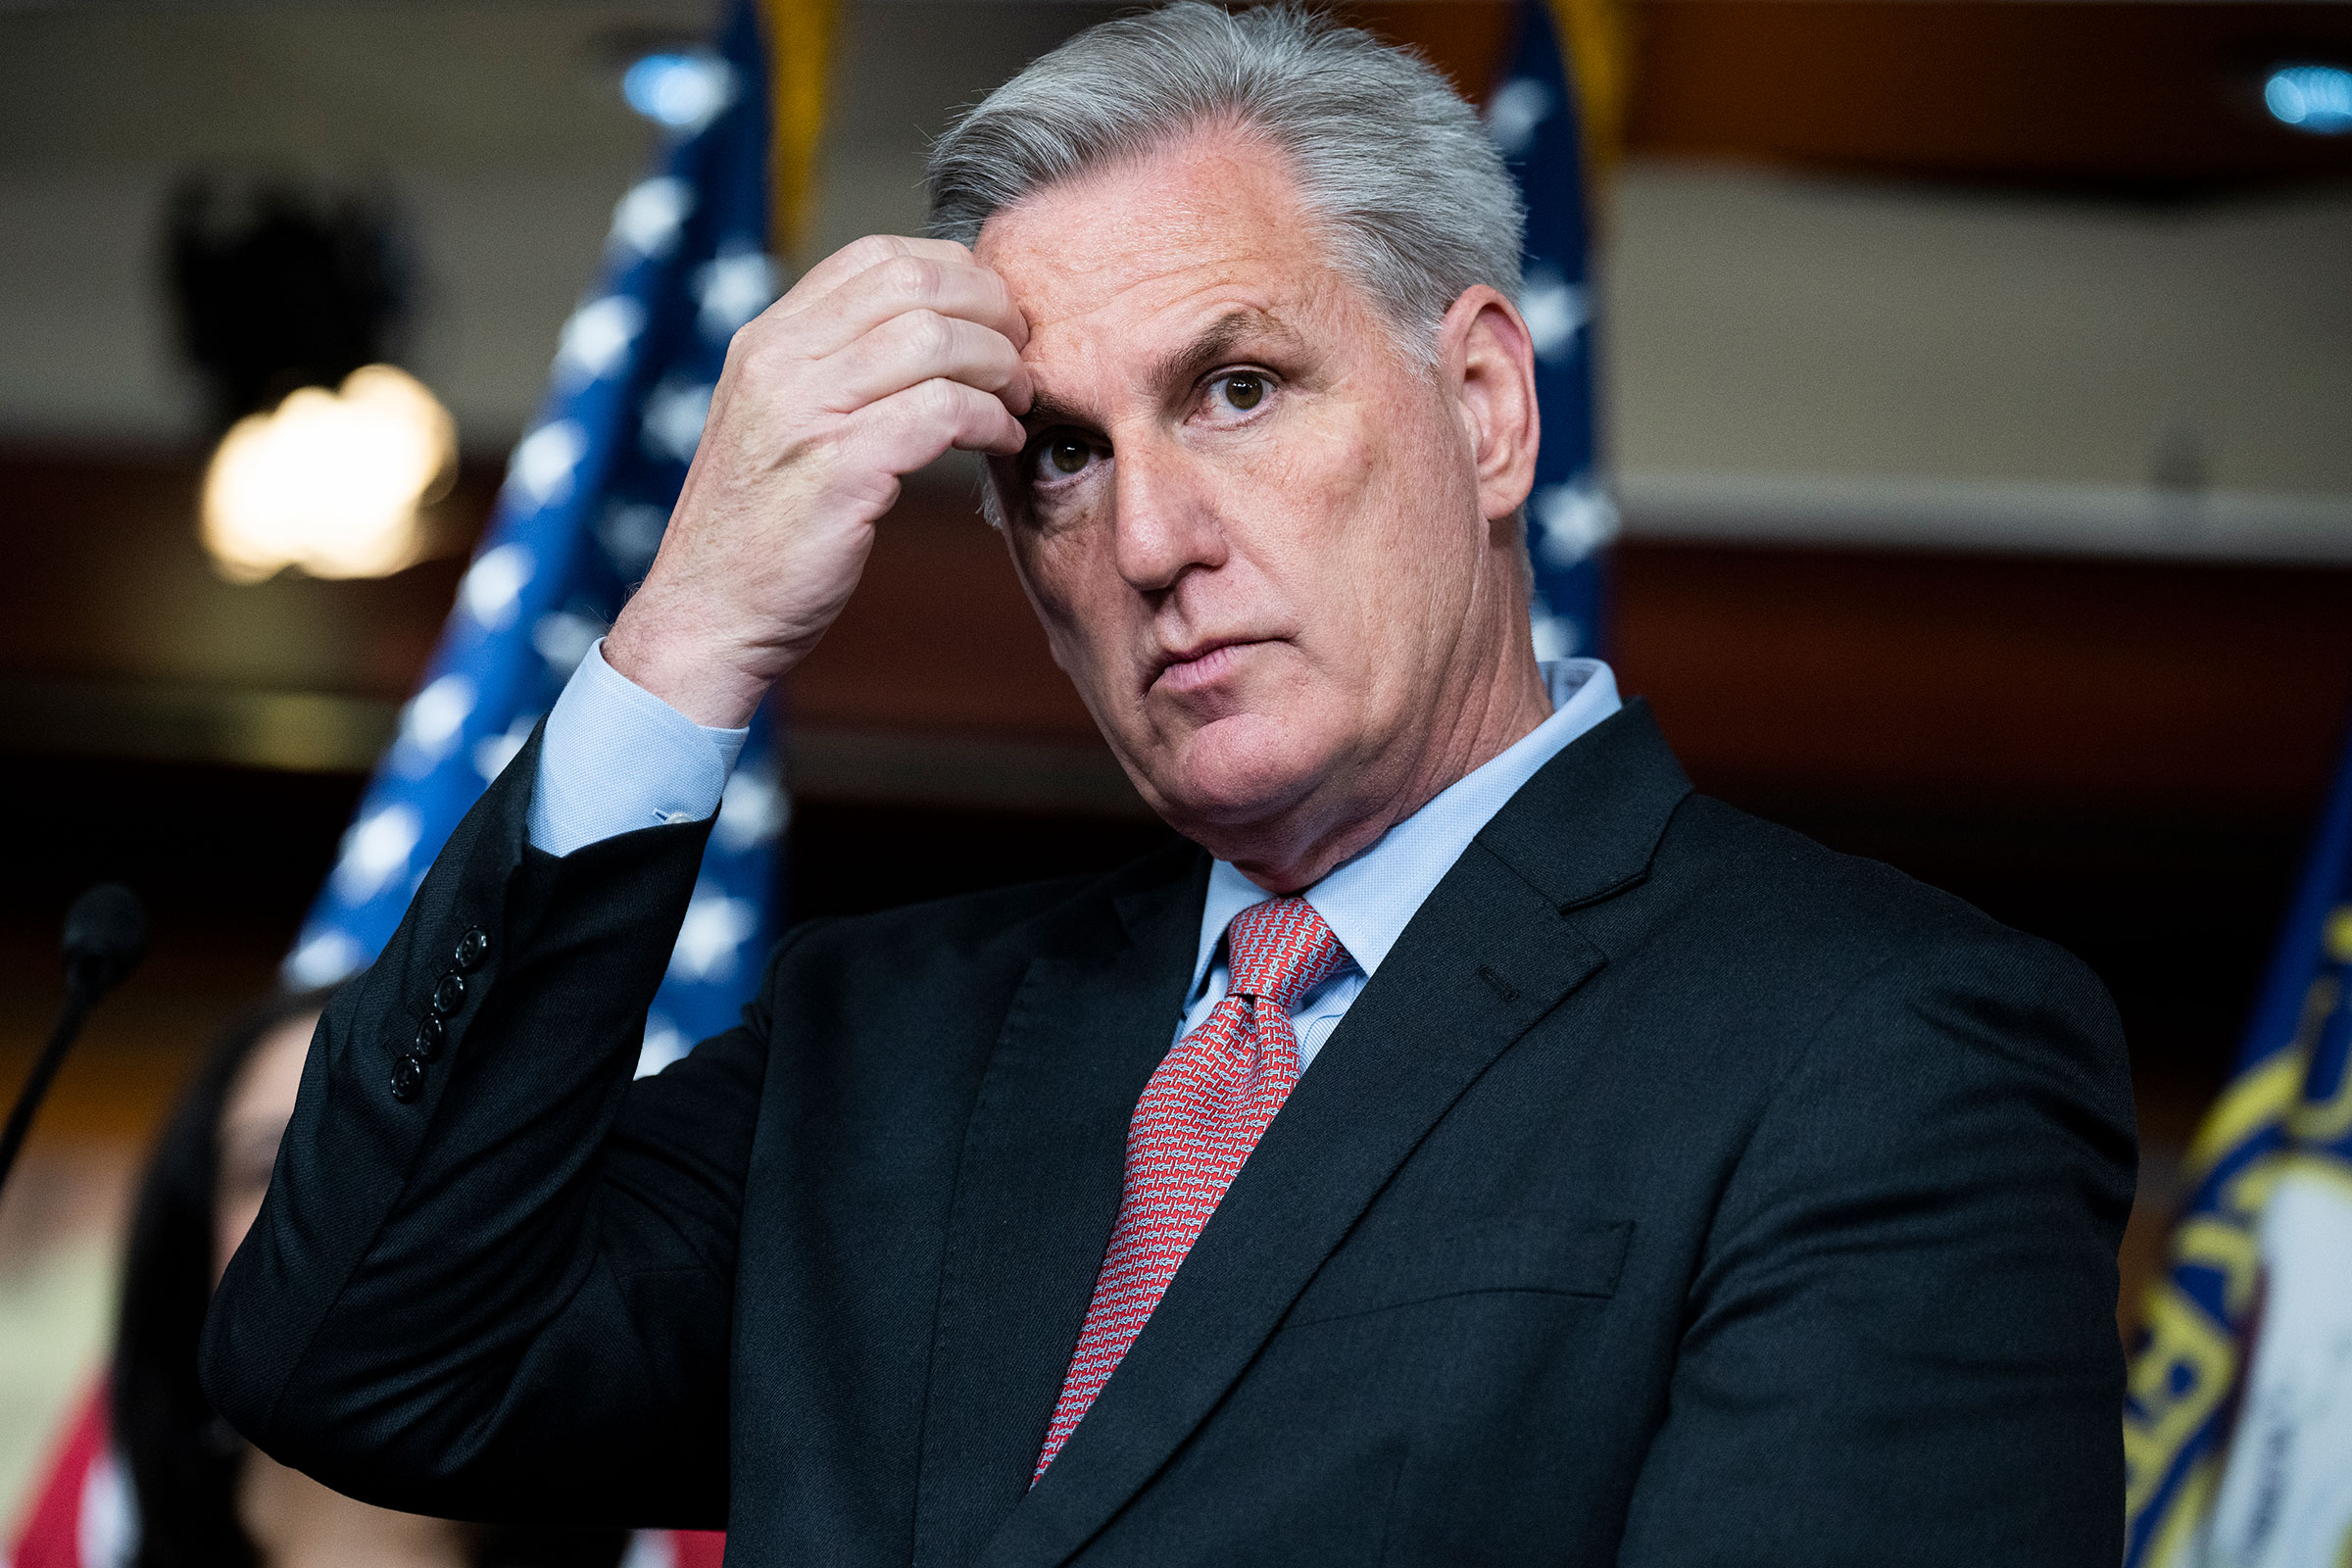 House Minority Leader Kevin McCarthy conducts a news conference with members of the House Republican Conference in Washington on Jan. 20, 2022. (Tom Williams—CQ Roll Call/AP)